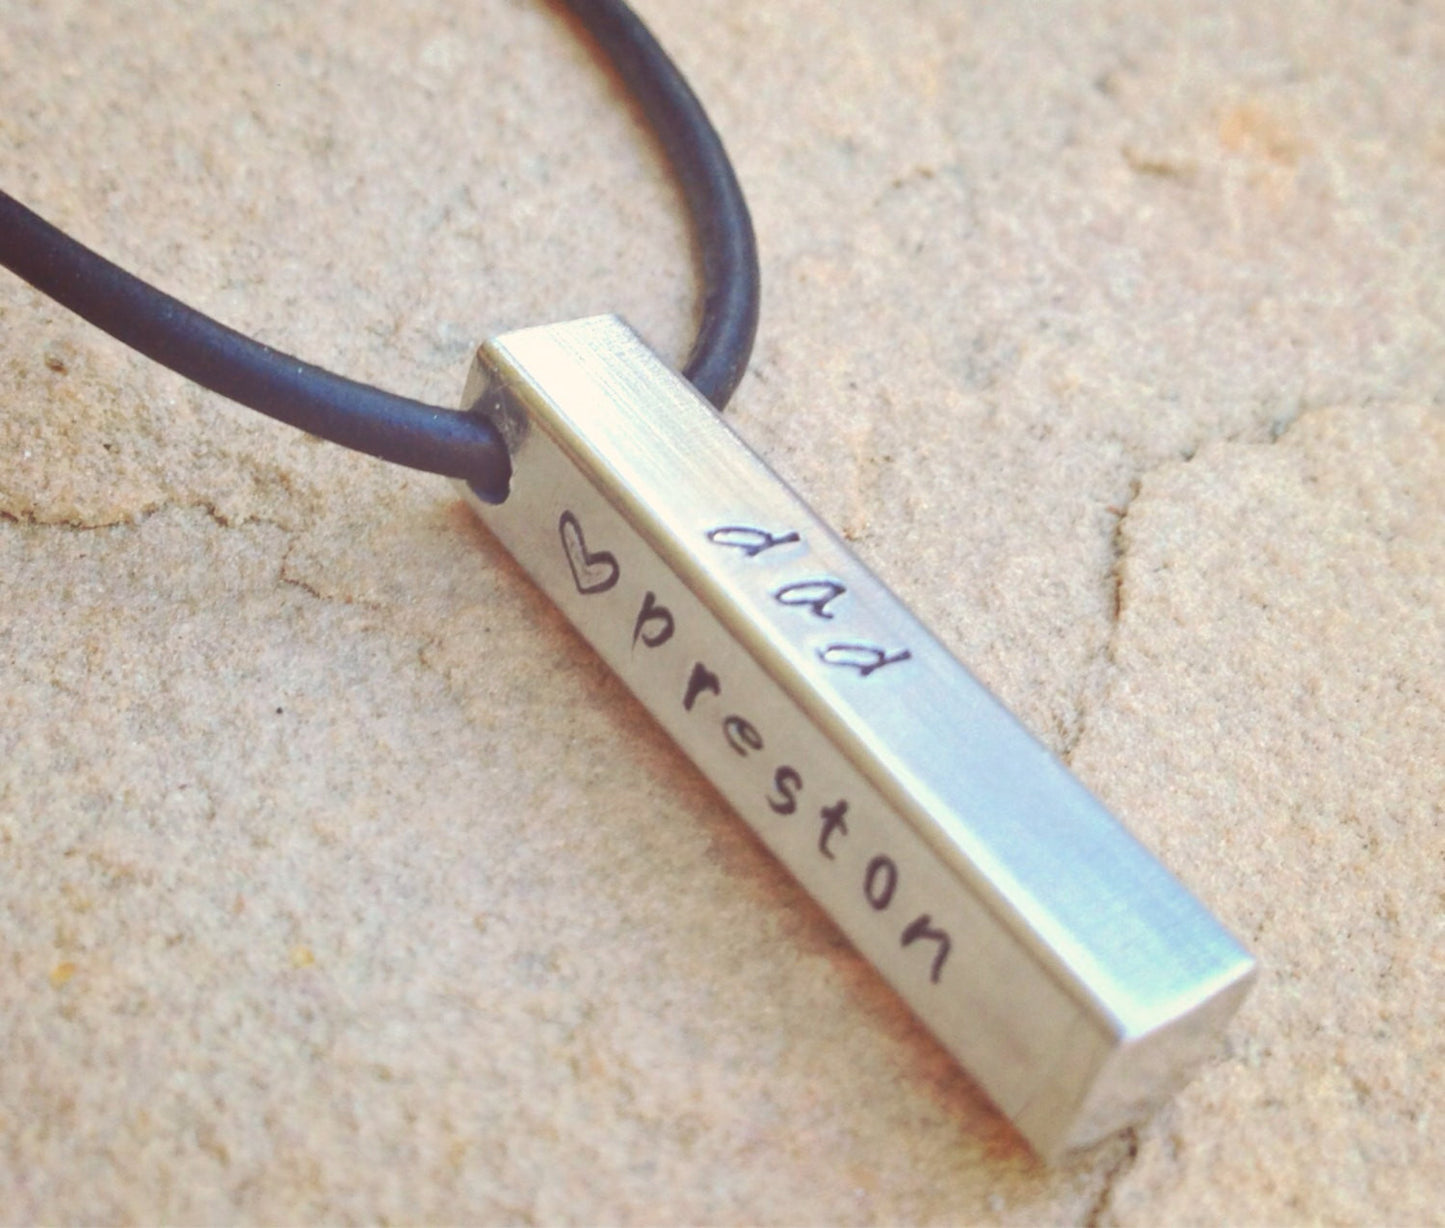 Mens Personalized Bar Necklace, Fathers Day Gift, Dad Necklace, Hand Stamped Bar Necklace, Mens Personalized Necklace, Gifts for Men - Natashaaloha, jewelry, bracelets, necklace, keychains, fishing lures, gifts for men, charms, personalized, 